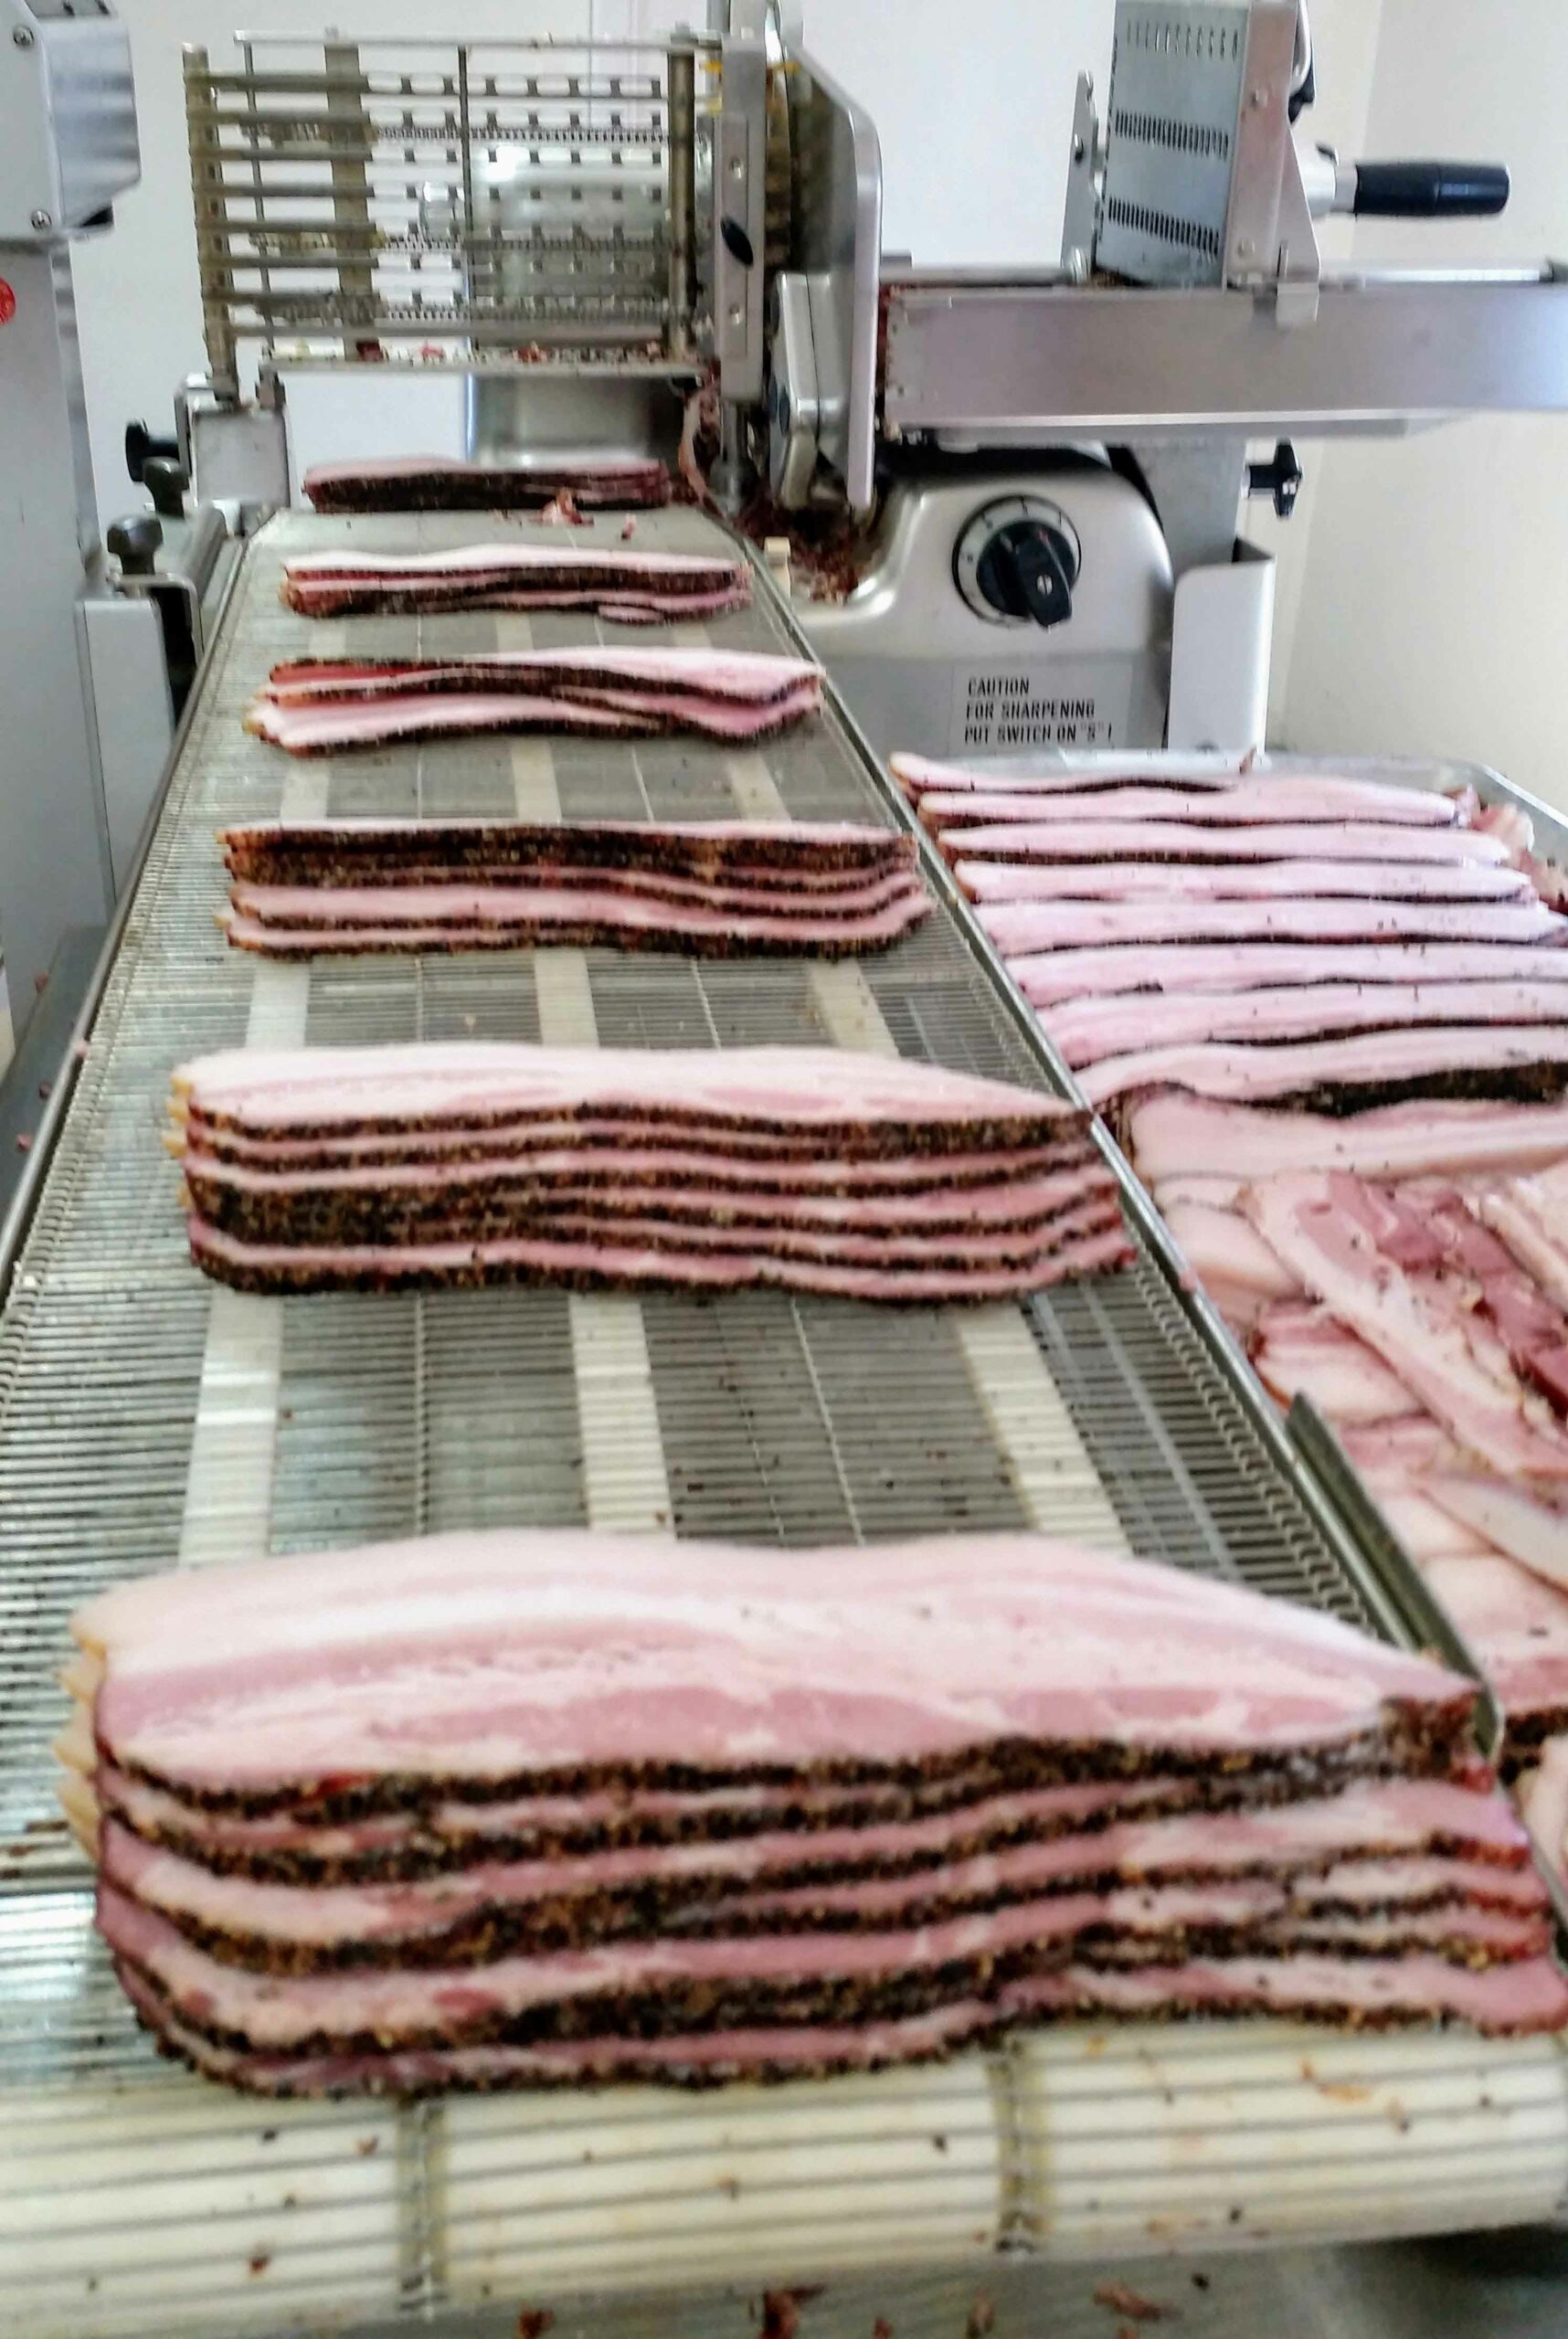 Processing bacon at Century Oak Packing Co